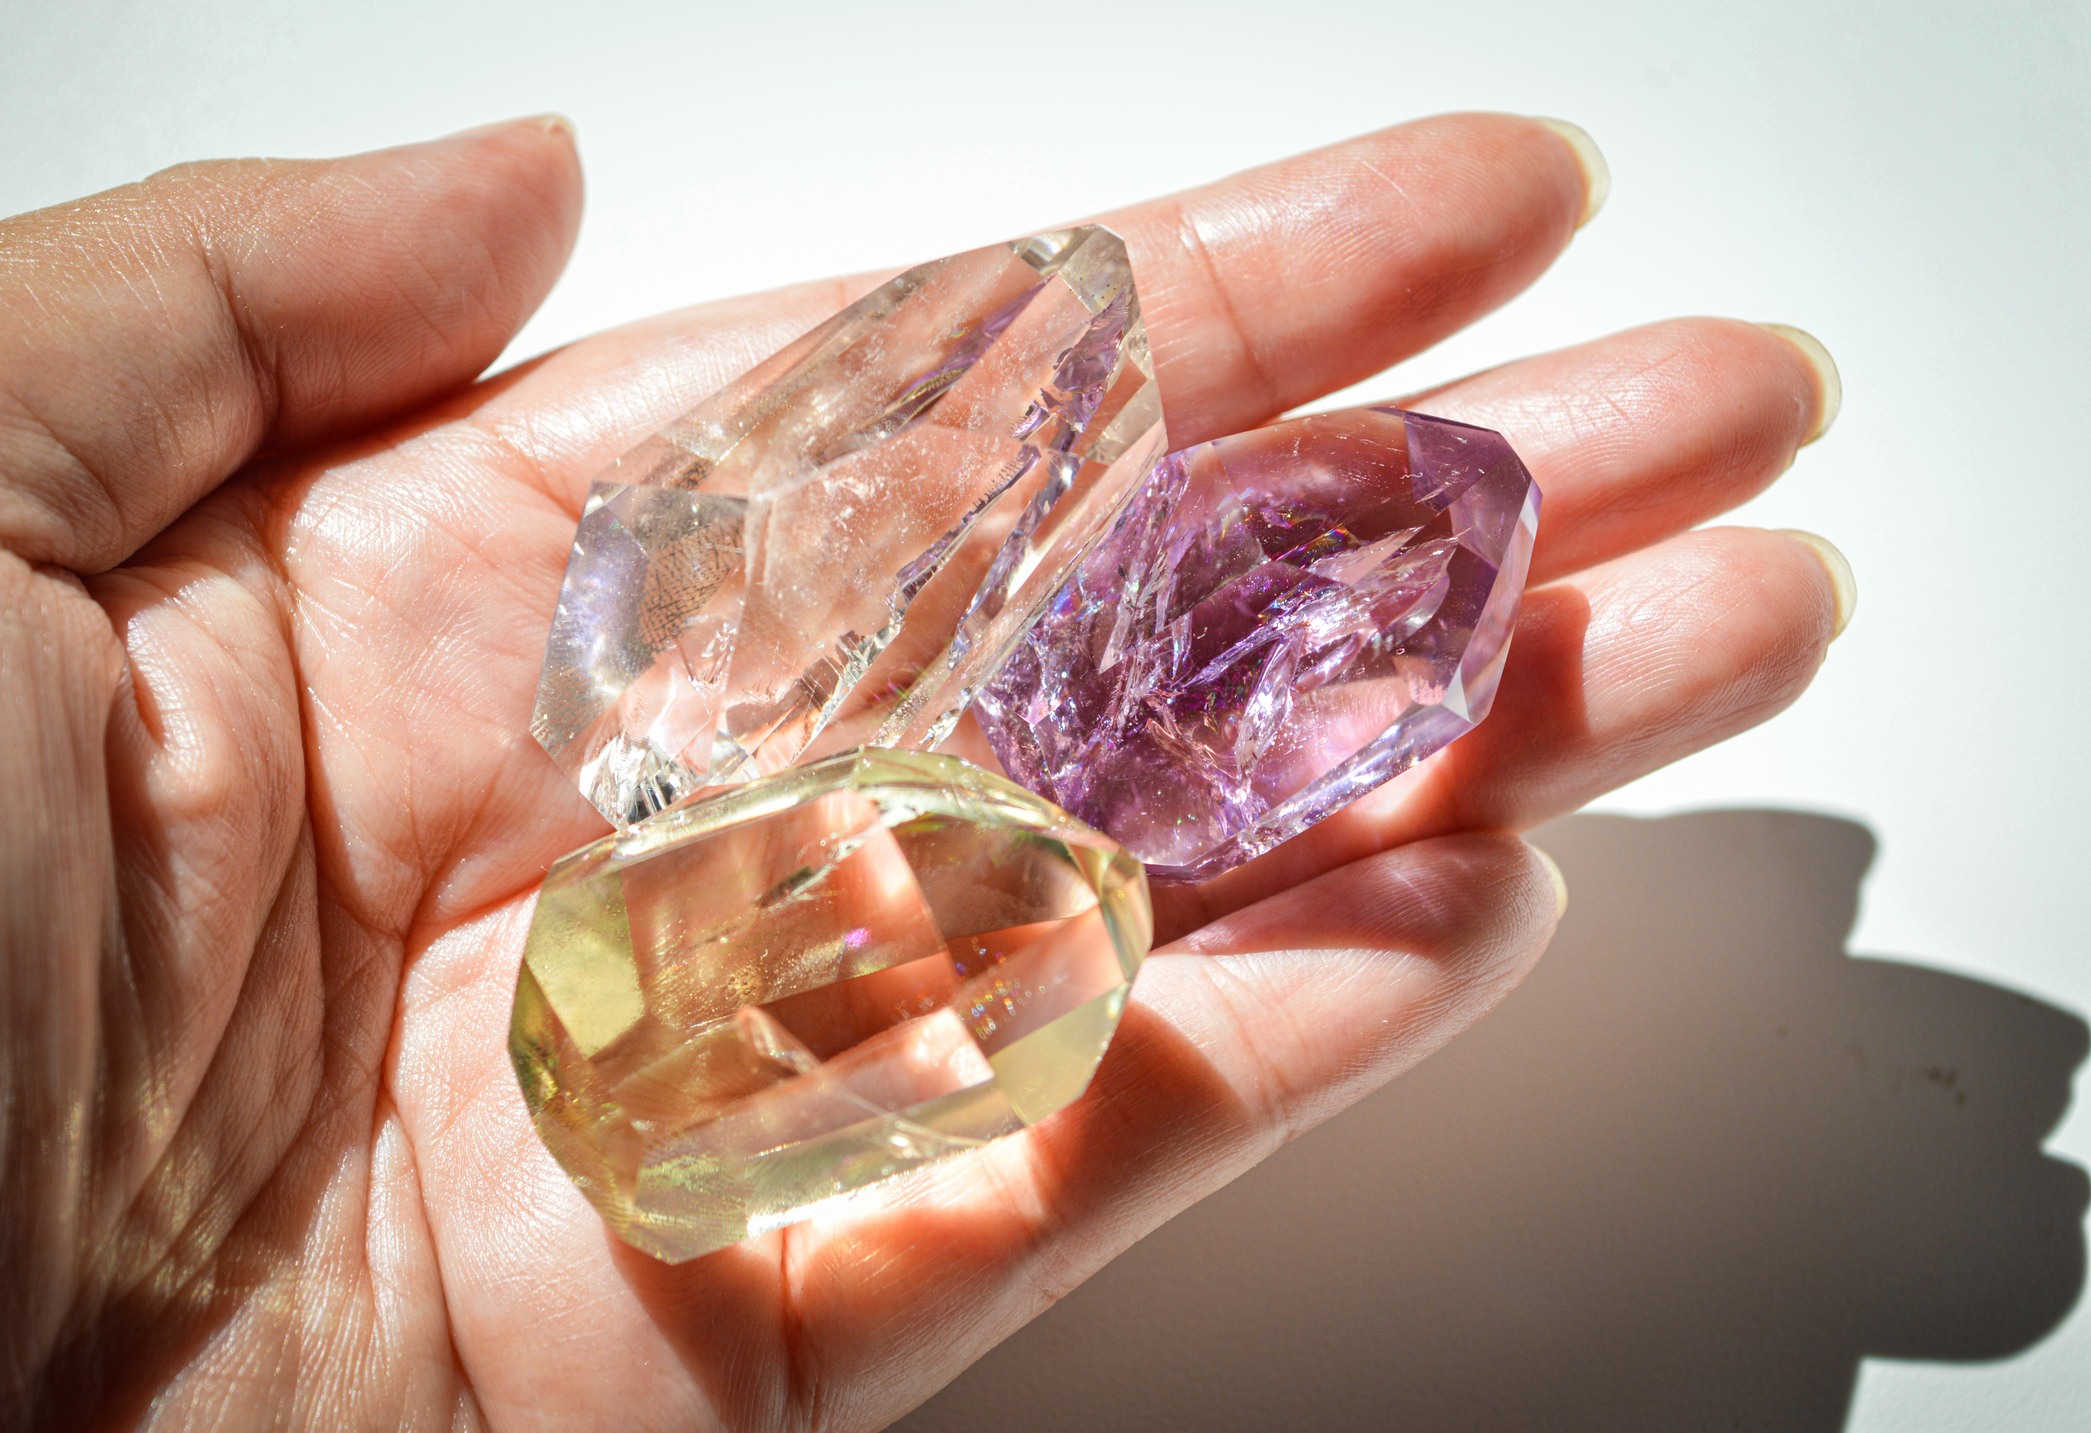 Hand holding three translucent crystals of varying shapes and sizes without any discernible text or individuals to name